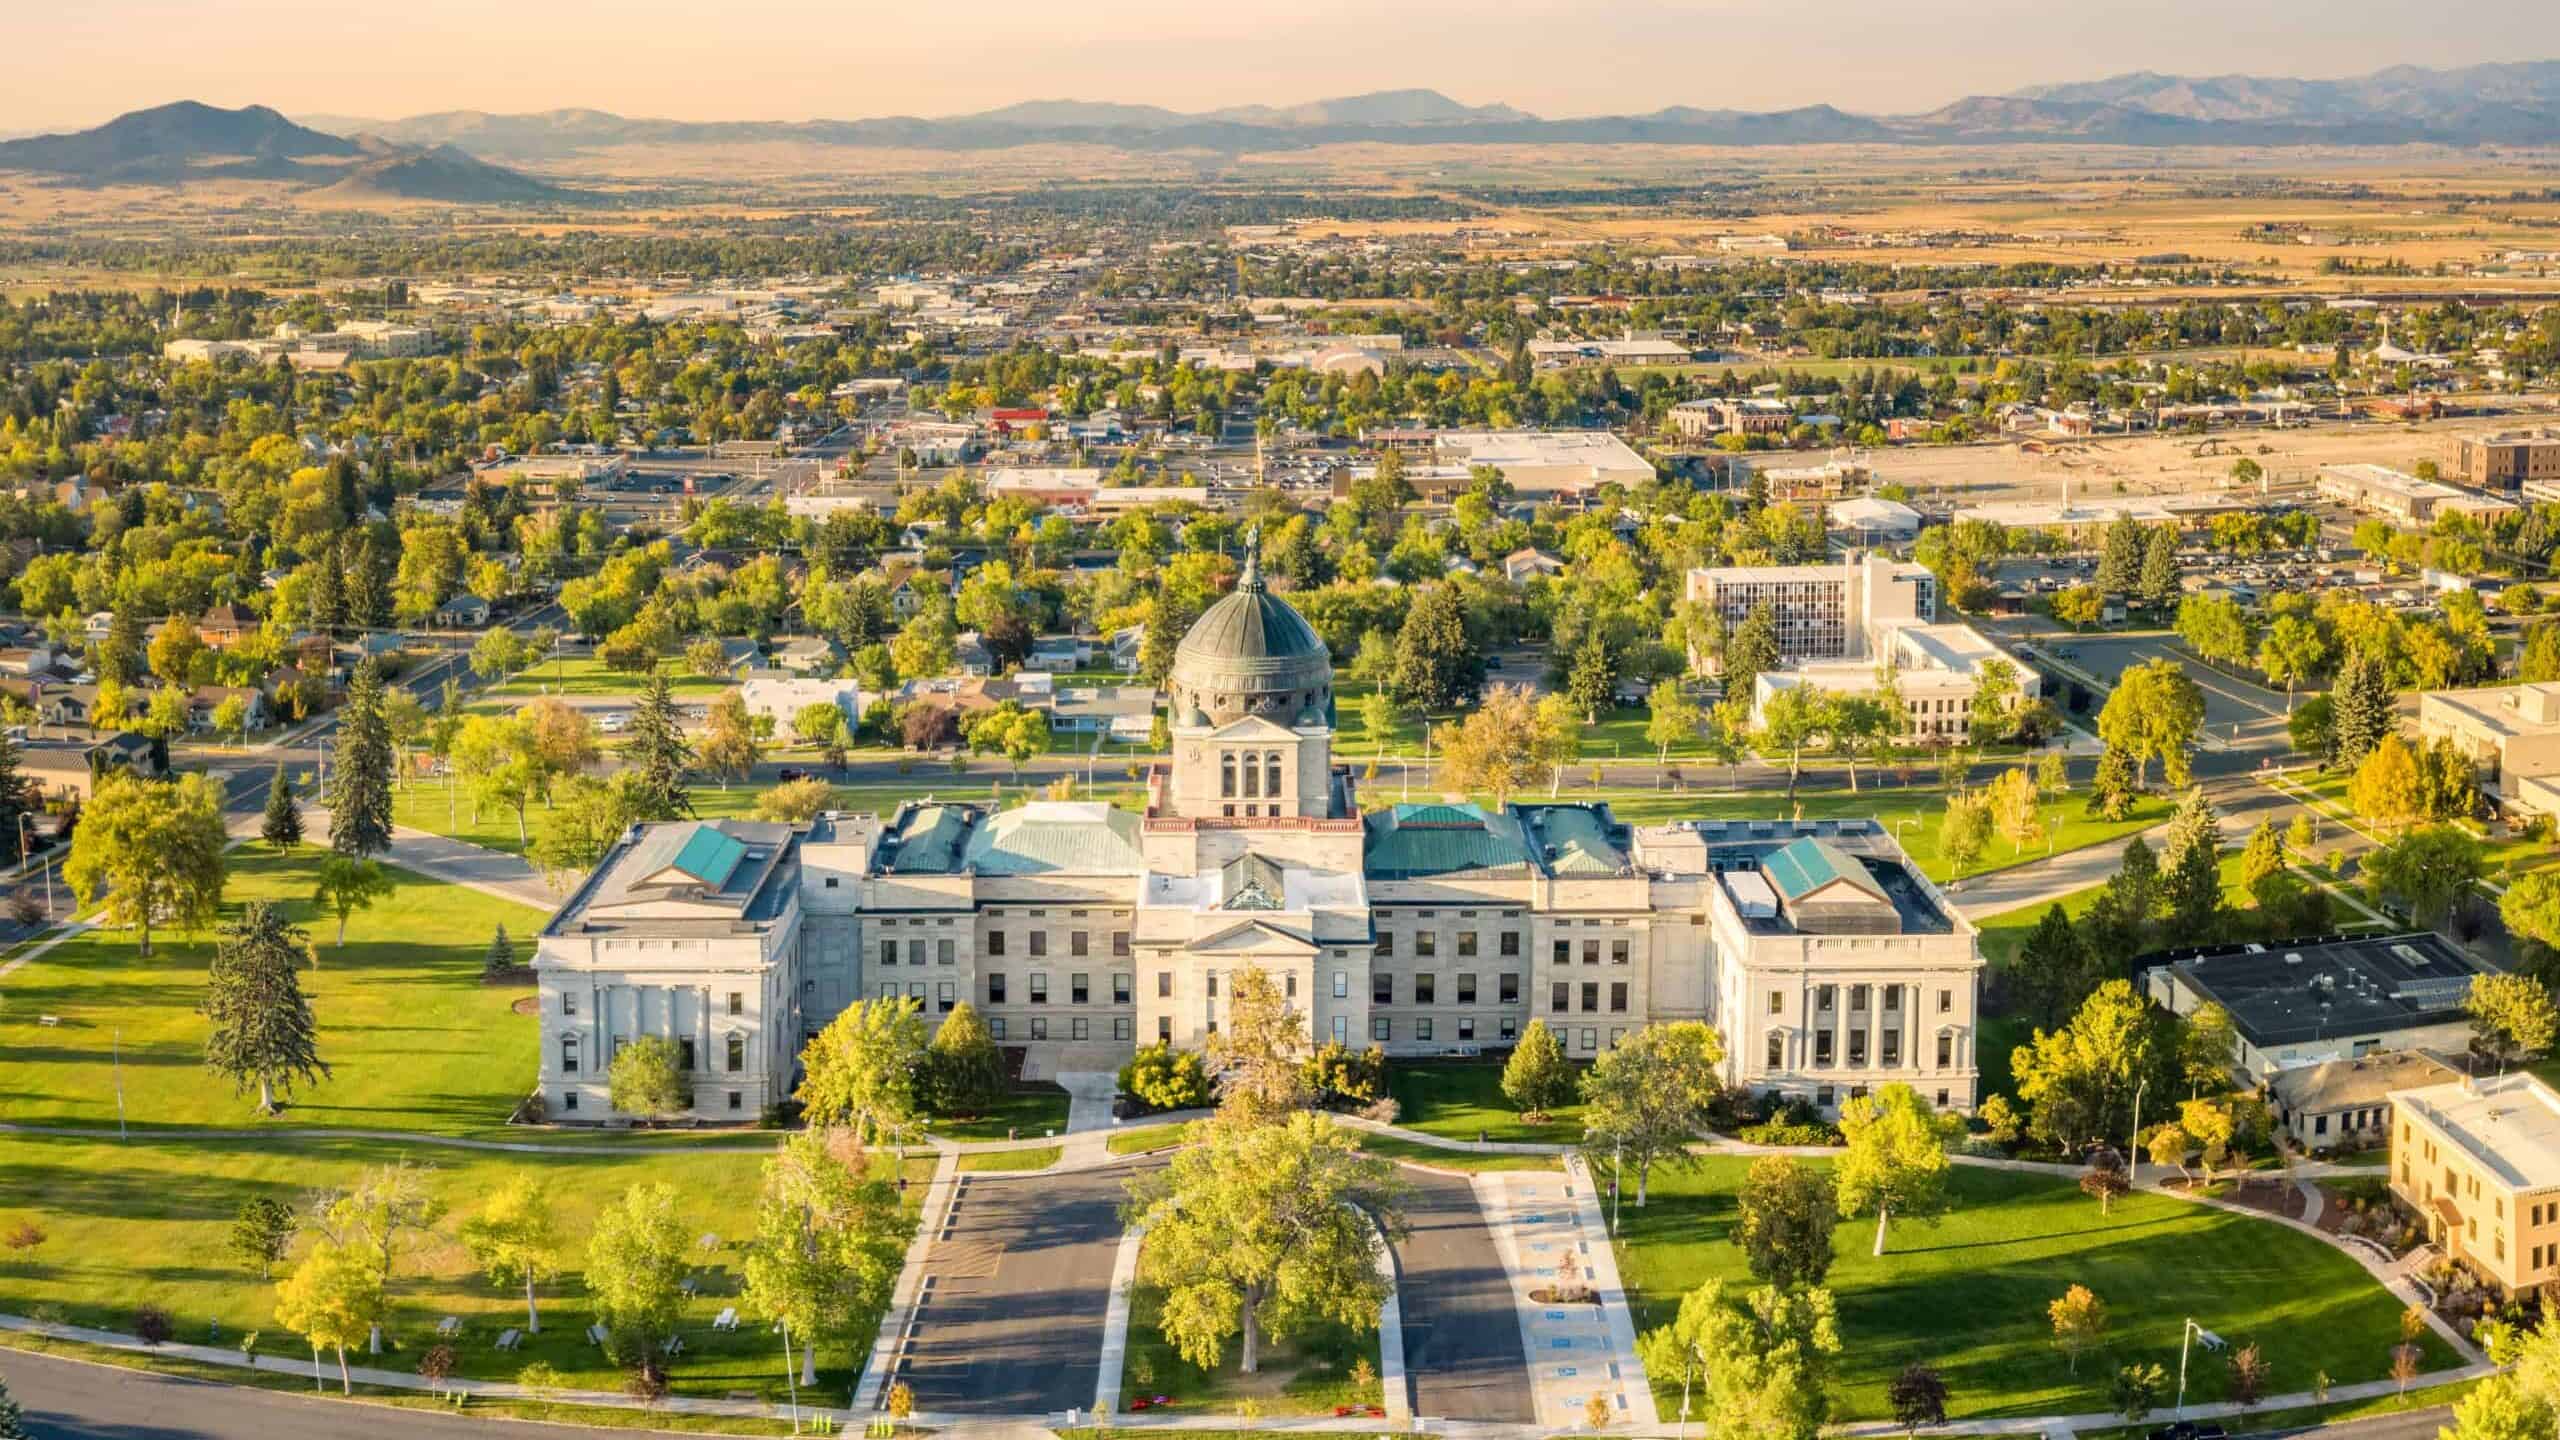 Drone view of the Montana State Capitol, in Helena, on a sunny afternoon with hazy sky caused by wildfires. The Montana State Capitol houses the Montana State Legislature. This is where an attempt on a kratom ban in Montana was made.